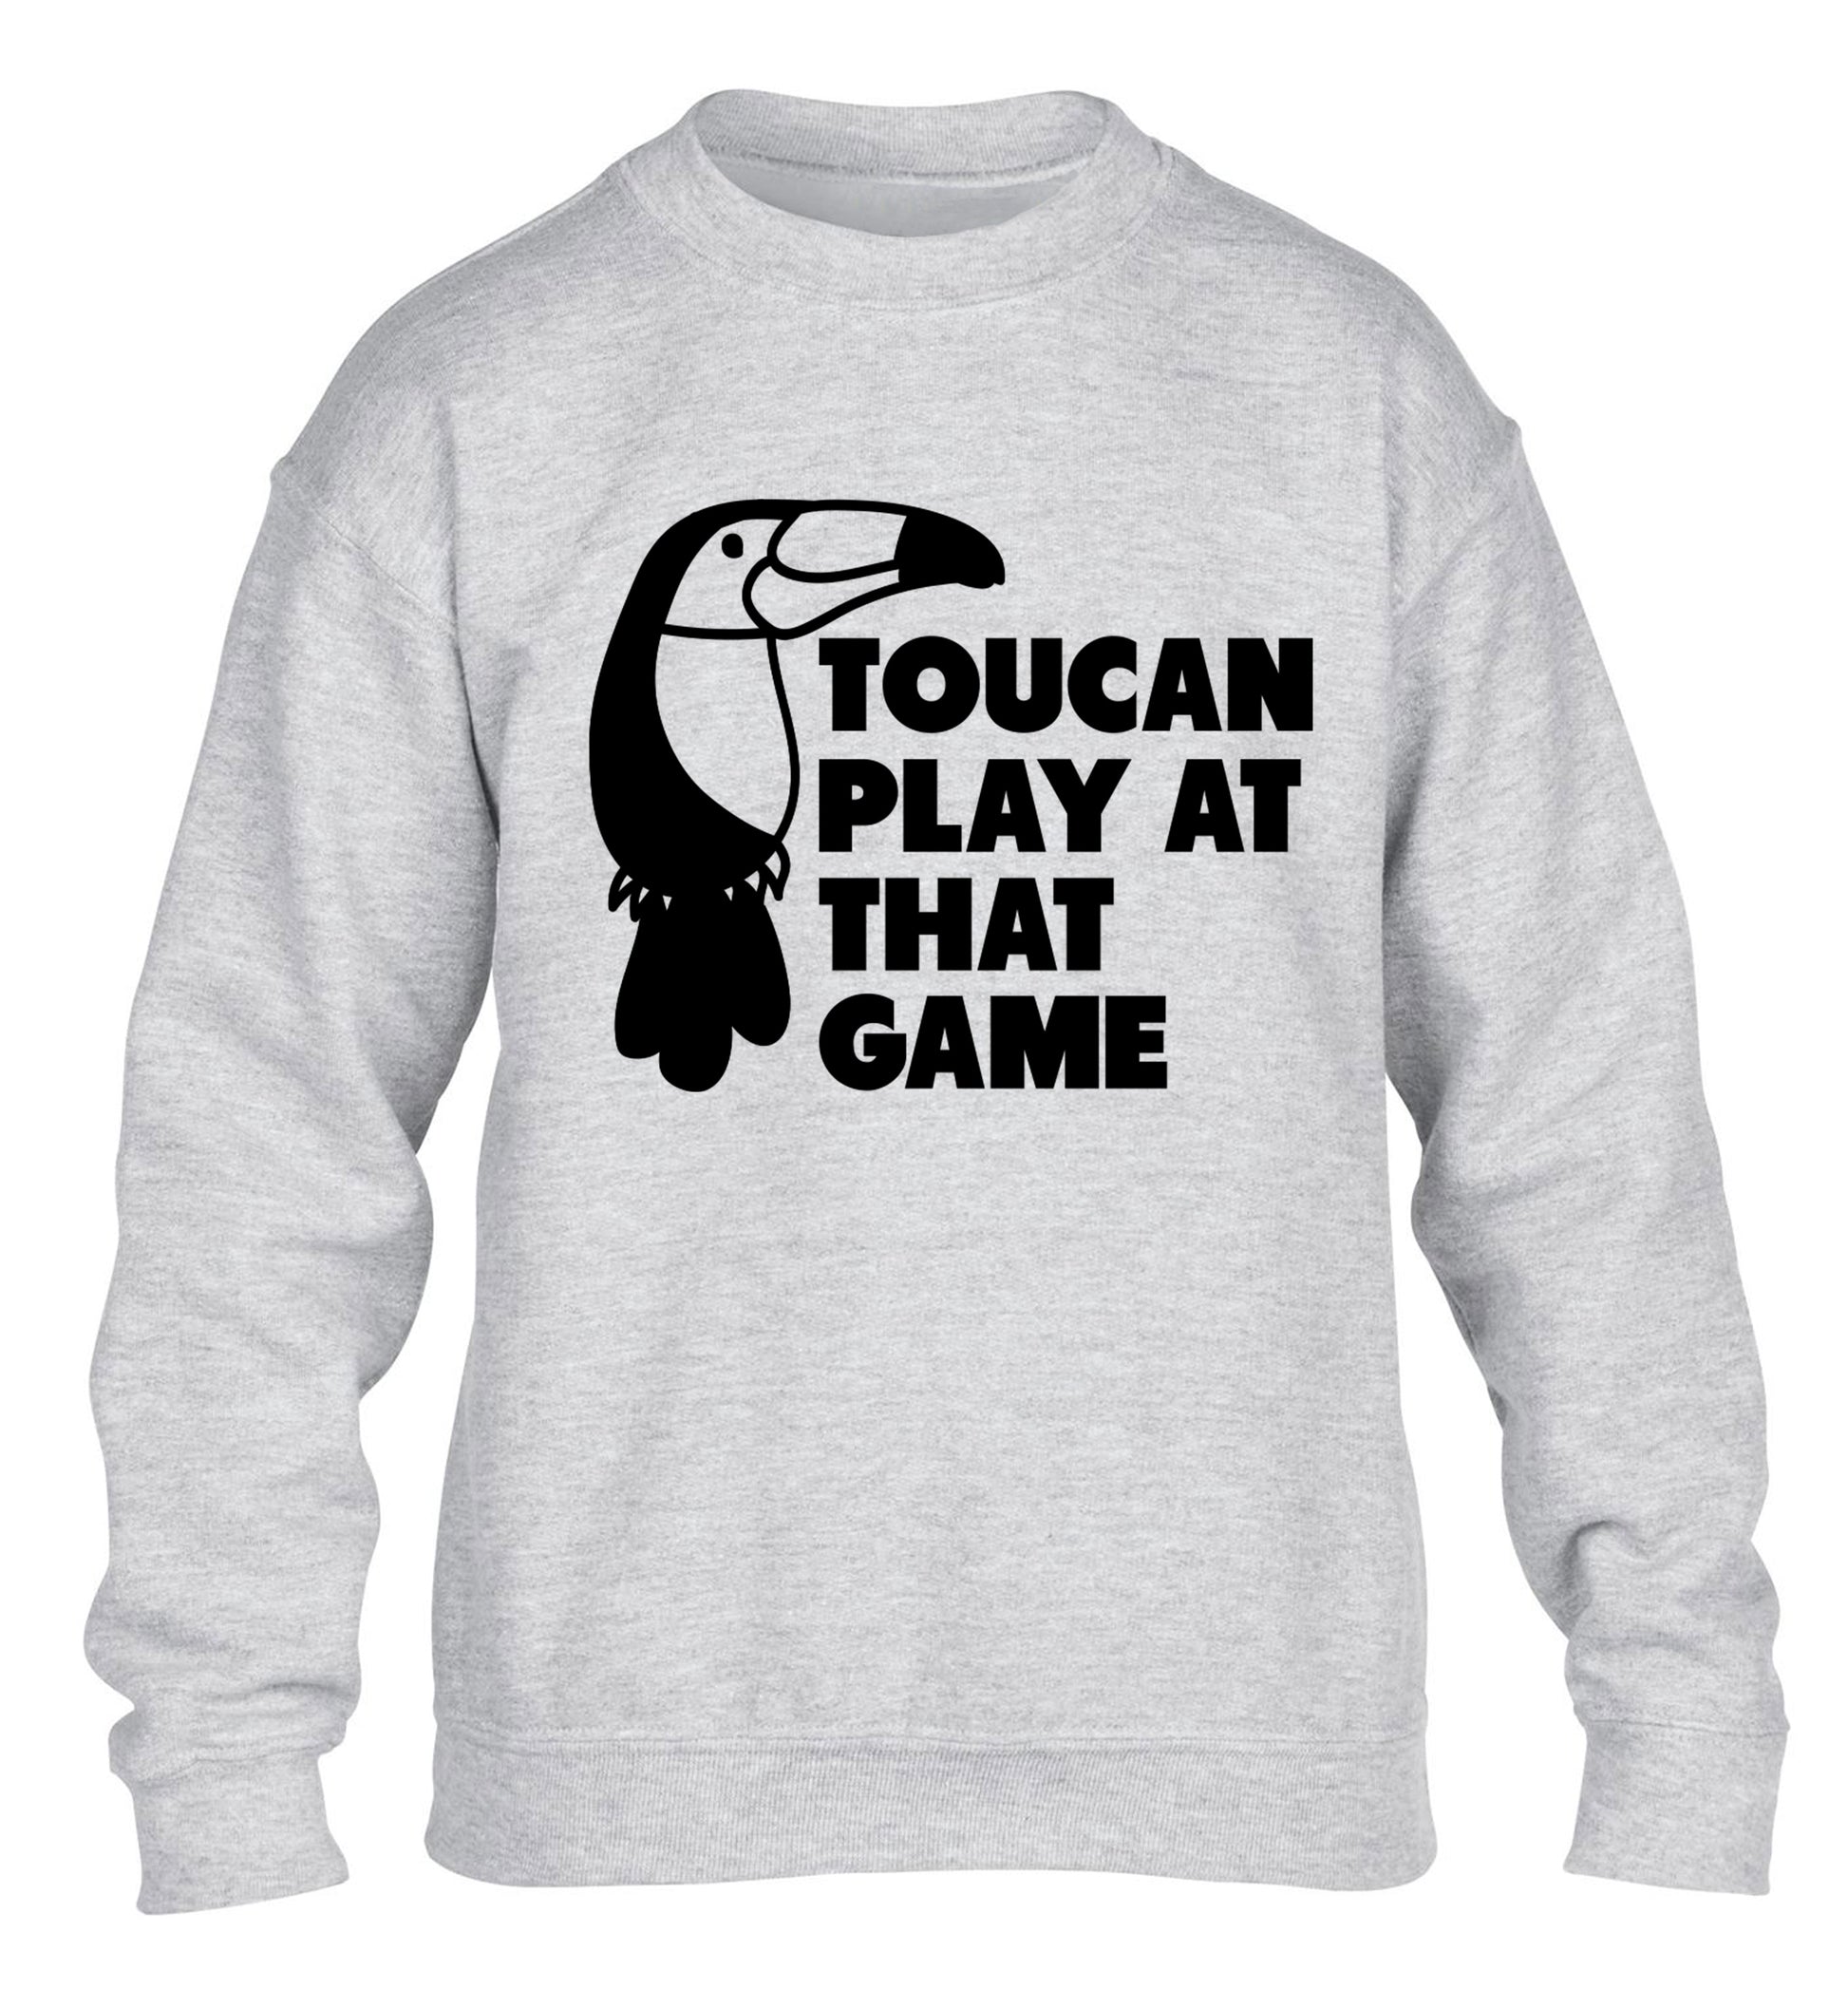 Toucan play at that game children's grey sweater 12-13 Years